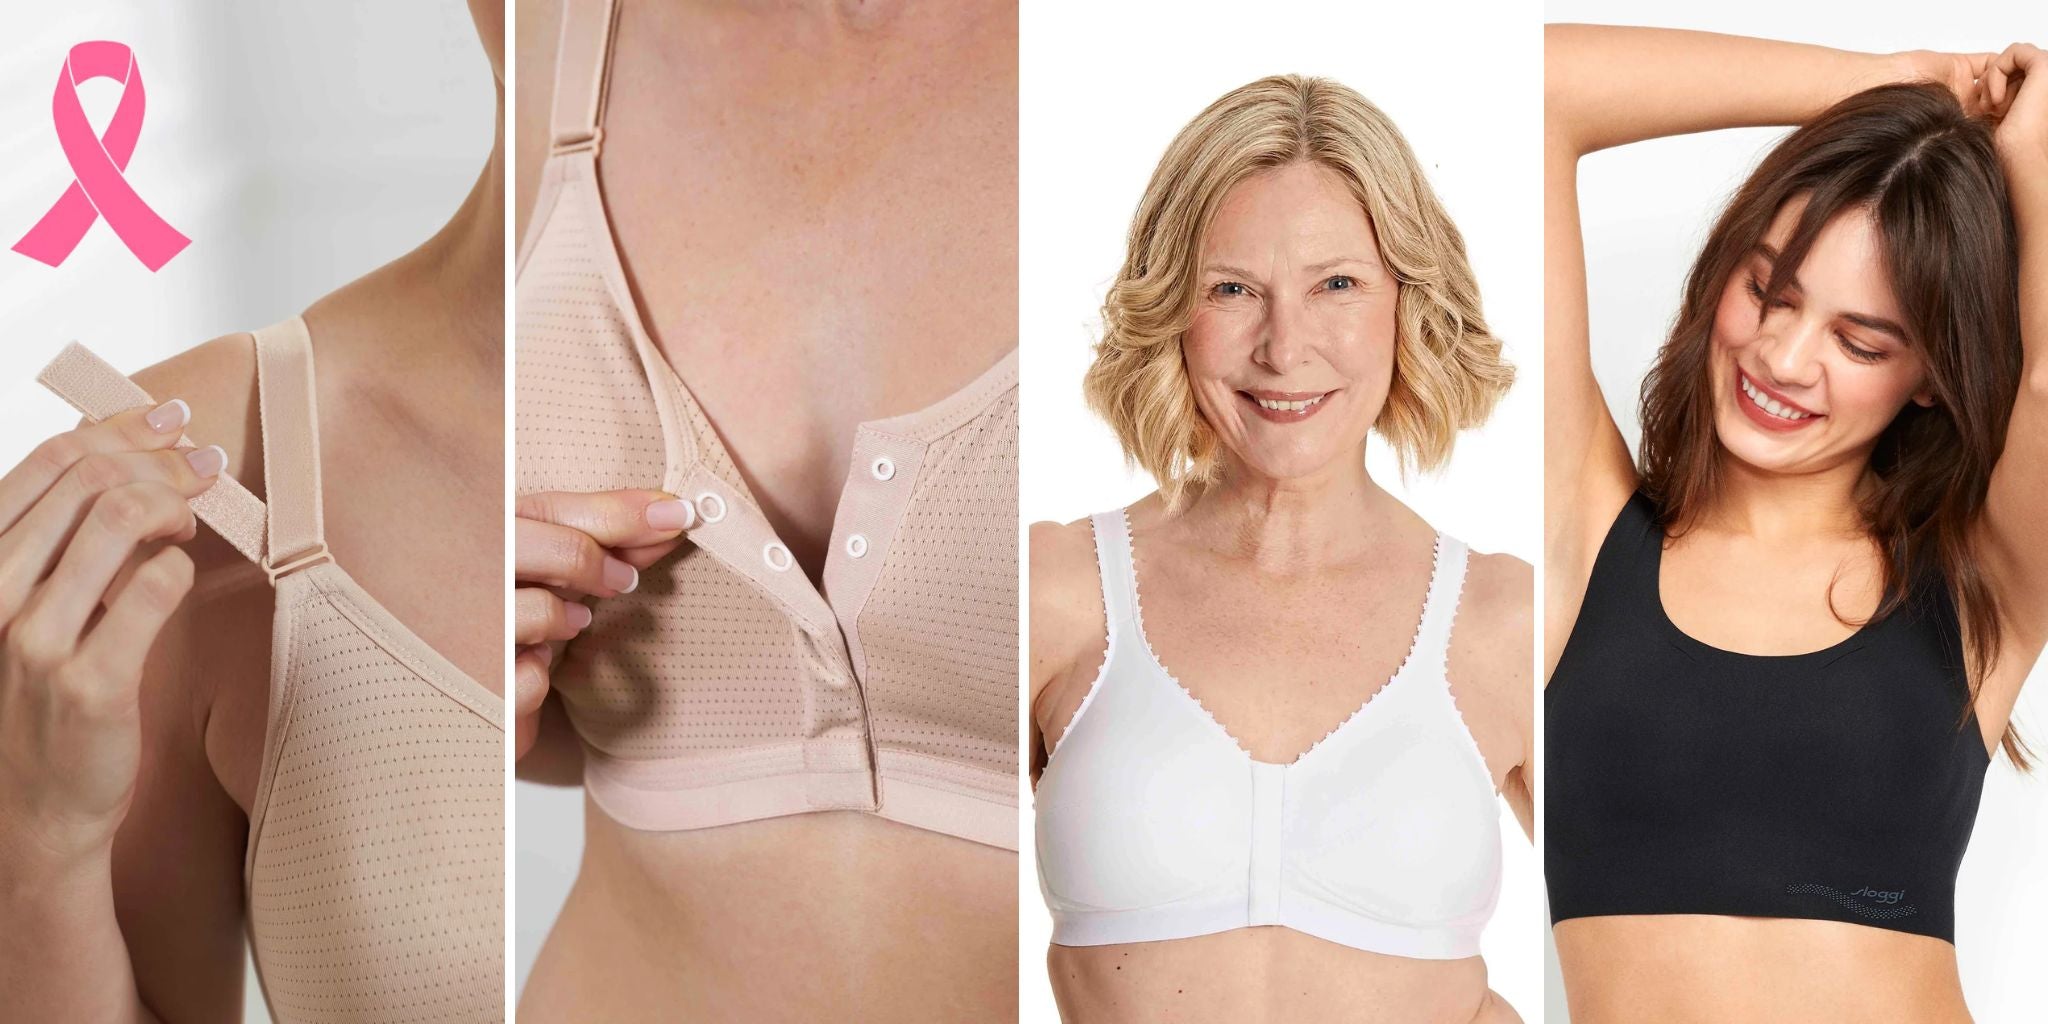 Here's Why Wearing Bra May Not be Crucial for Breast Health